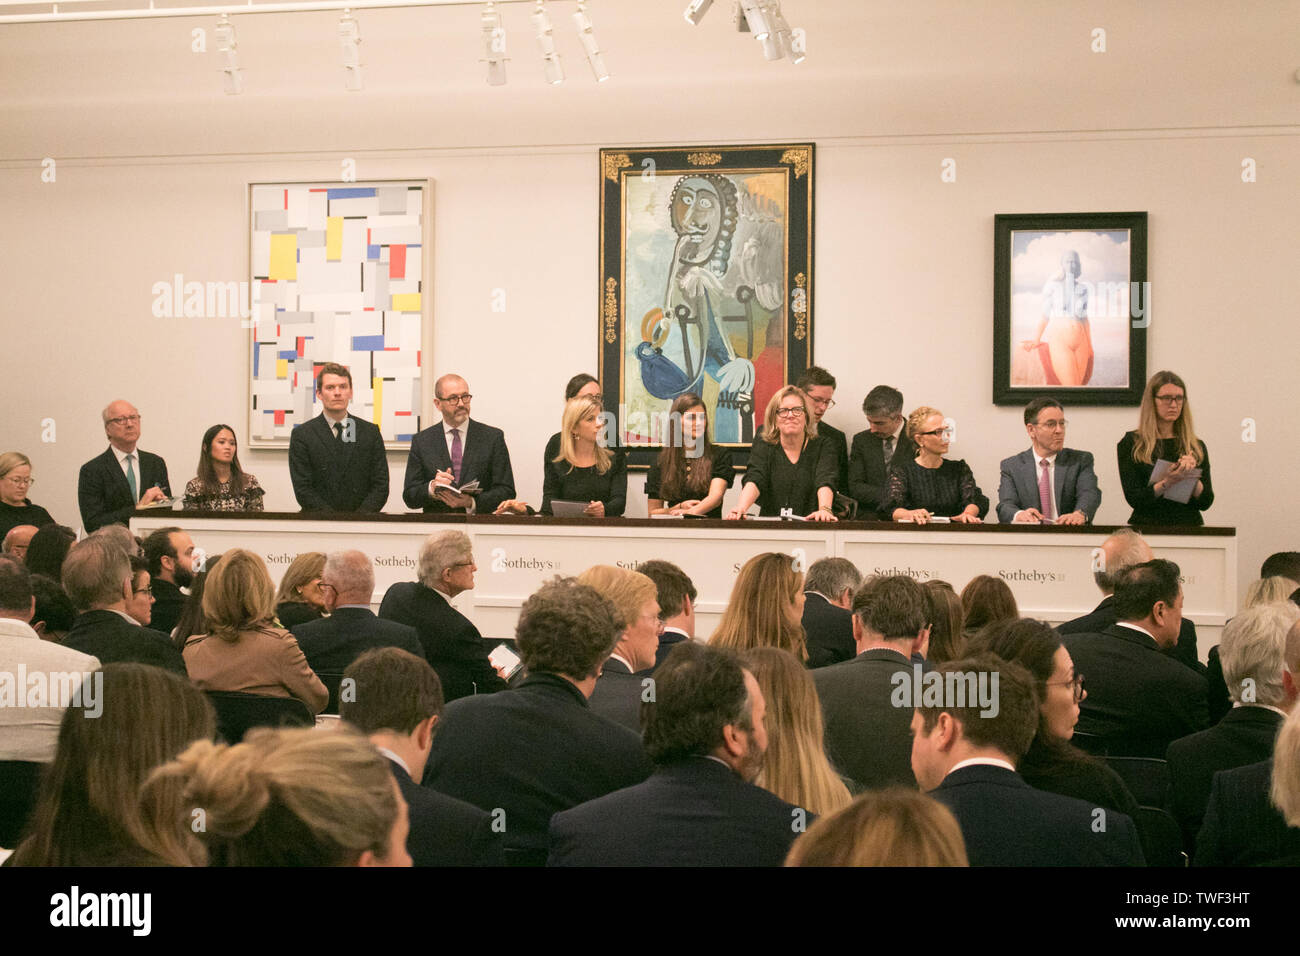 Sotheby's staff taking bids for  L-R 'Relational Painting No 60 by Fritz Glamer, oil on canvas, Estimate £450,000 which sold at hammer for £620,000;'Homme a la pipe by Pablo Picasso, Estimate £5,500,000m which sold at hammer for £6,500,000m; 'La magie noire, oil on canvas  by René Magritte, Estimate £2,500,000 which sold at hammer for £3,500,000 during the Impressionist & Modern Art Evening Auction  at Sotheby’s in London. Stock Photo